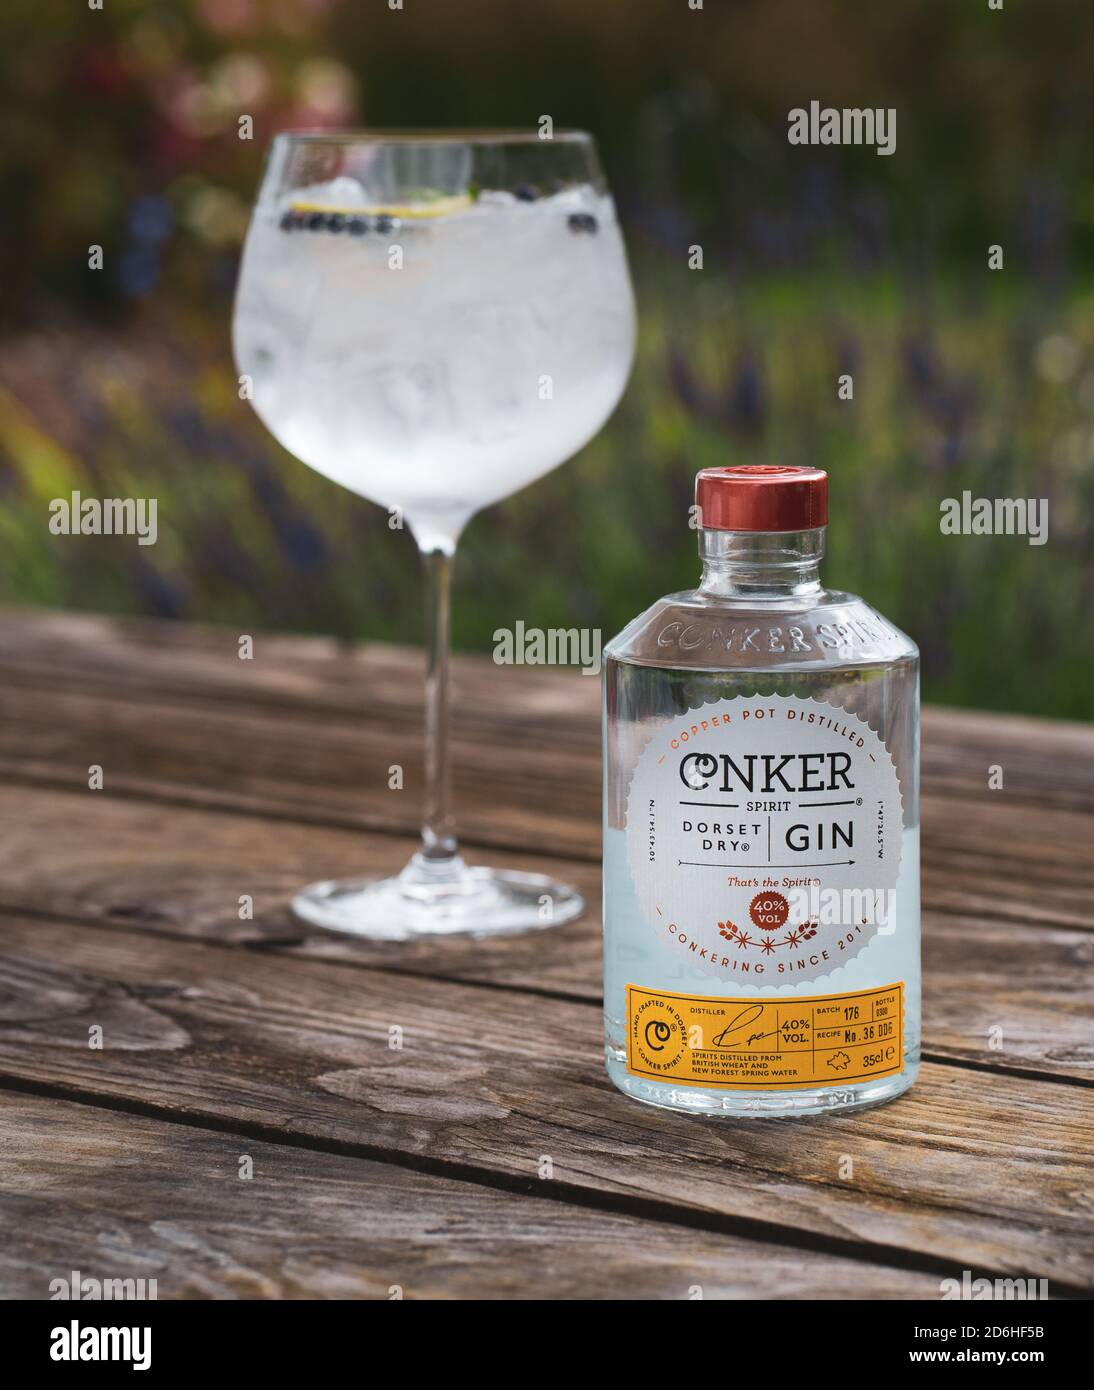 Large gin and tonic drinks glass containing ice and lemon with Conker Dorset Dry Gin bottle in front of lavender bushes in the summer Stock Photo